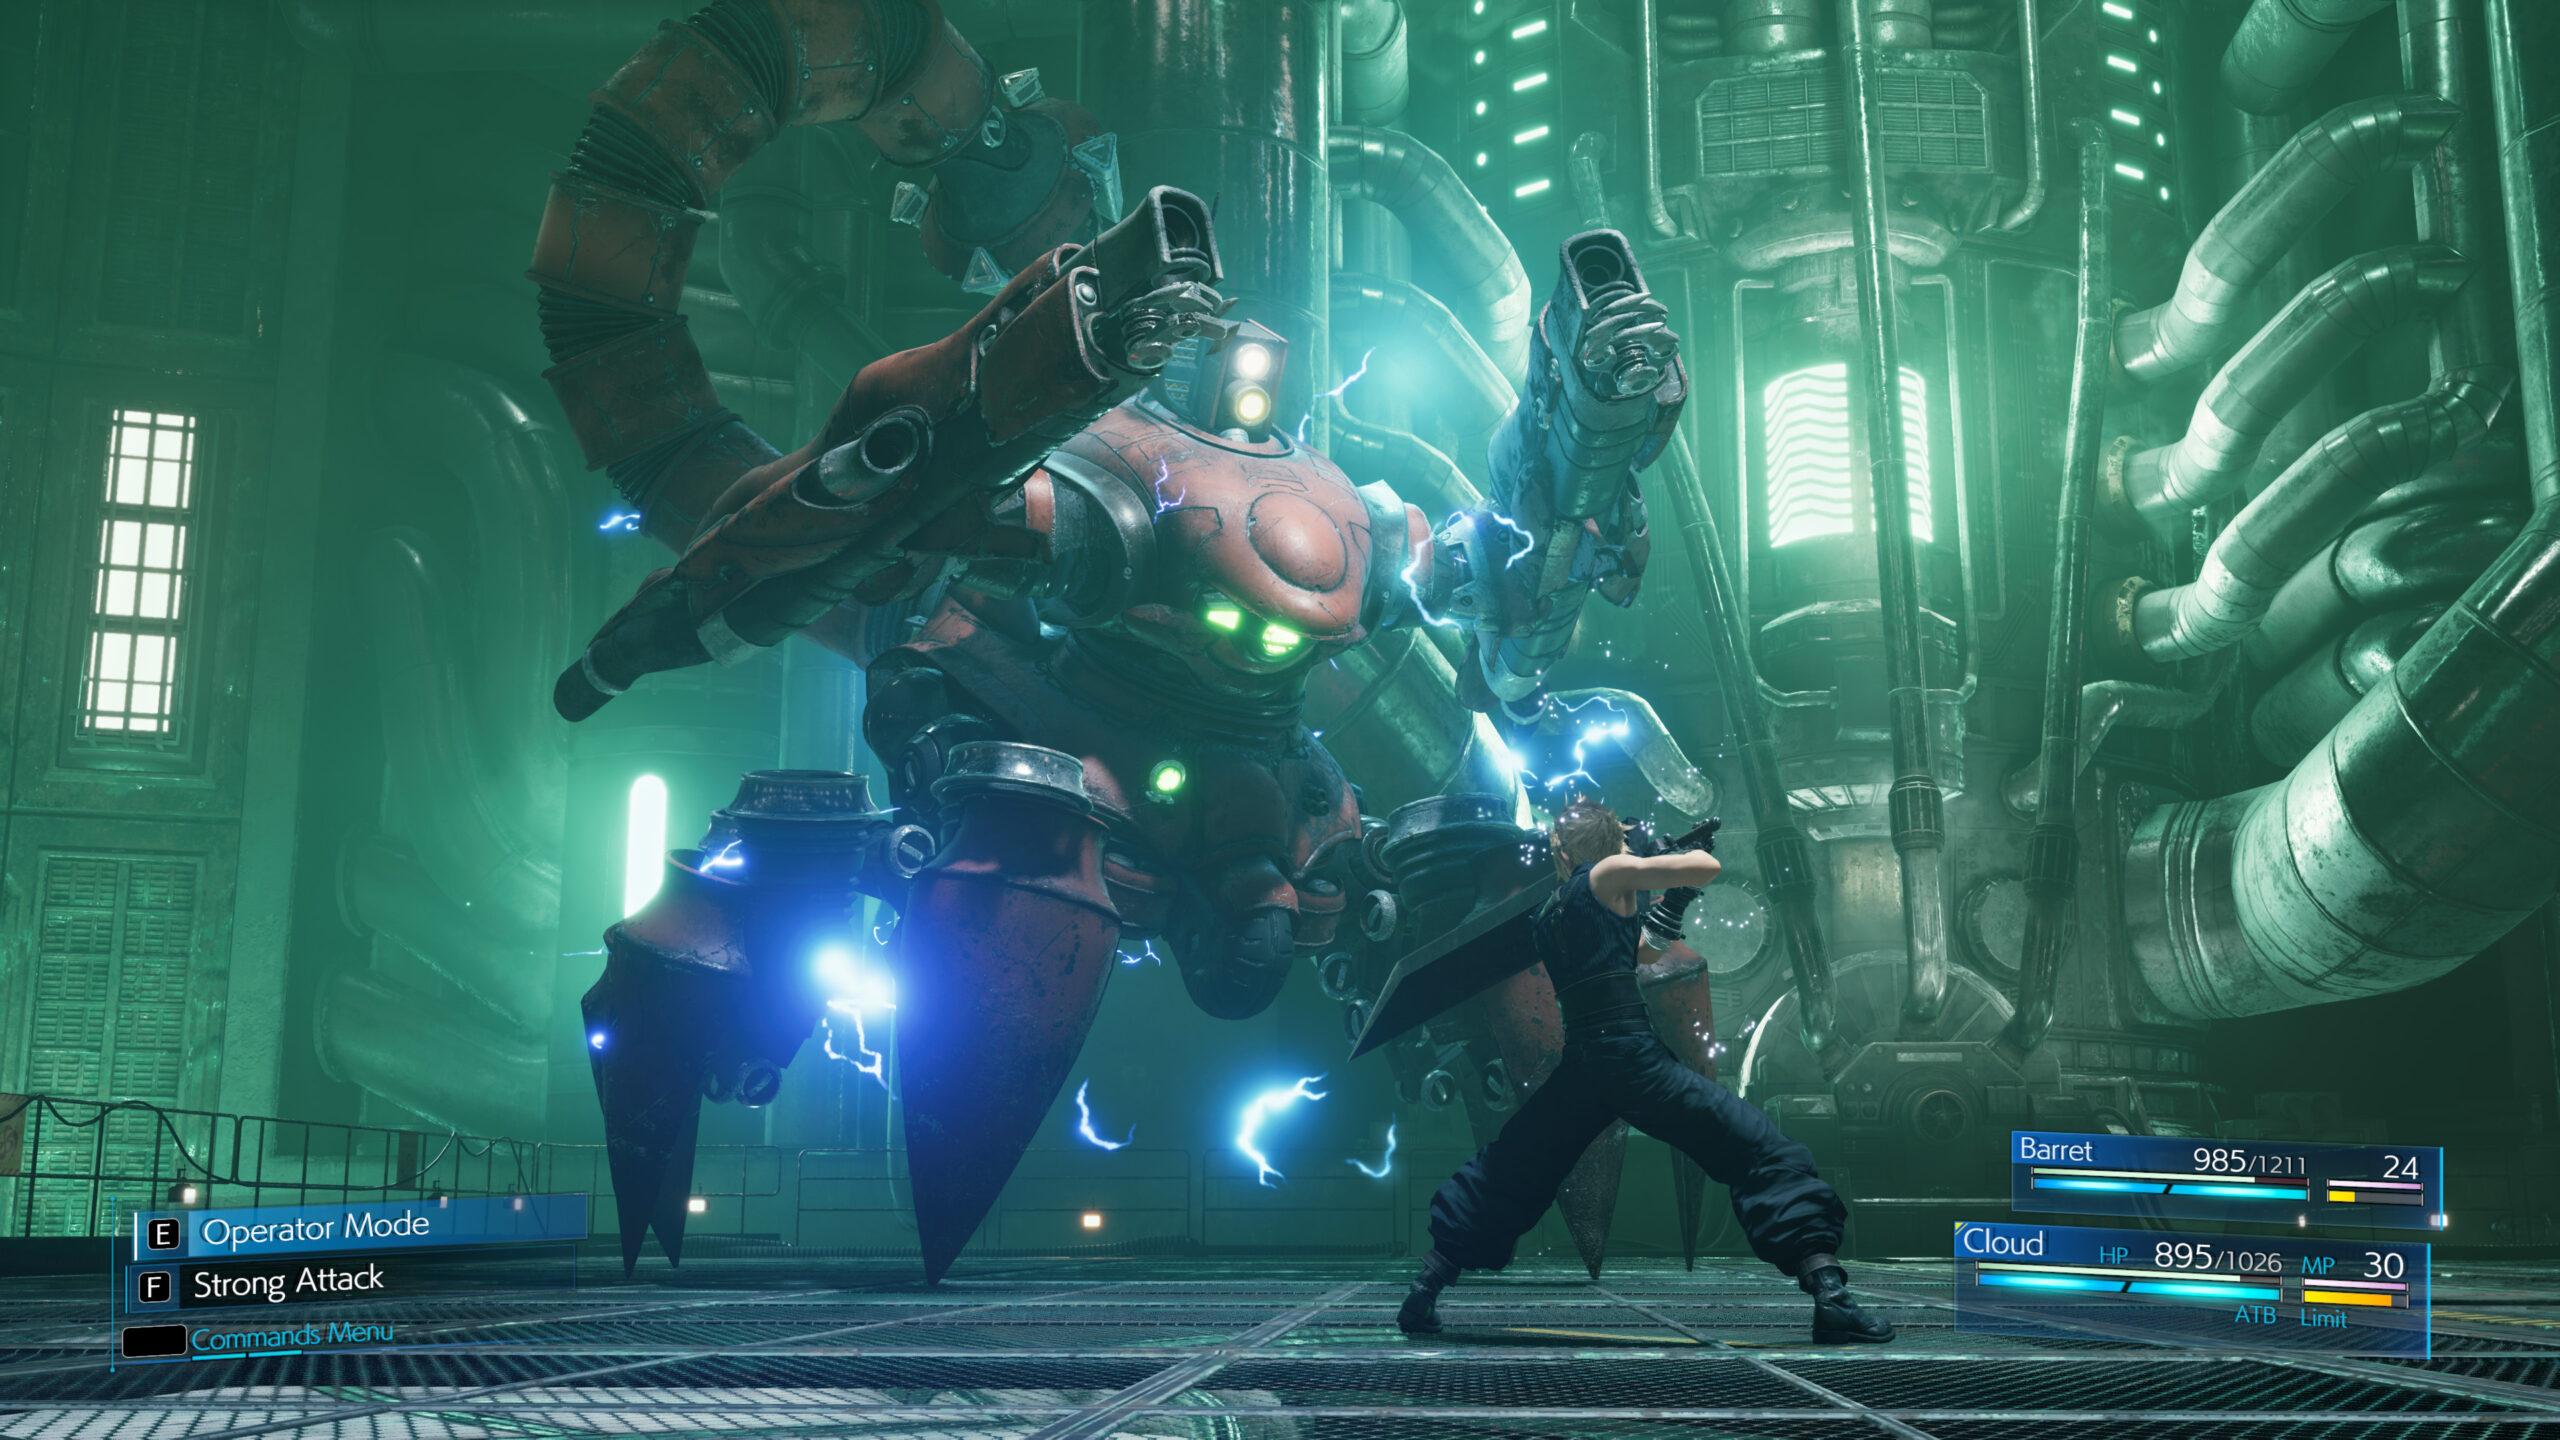 Review: Final Fantasy VII Remake summons back a timeless classic